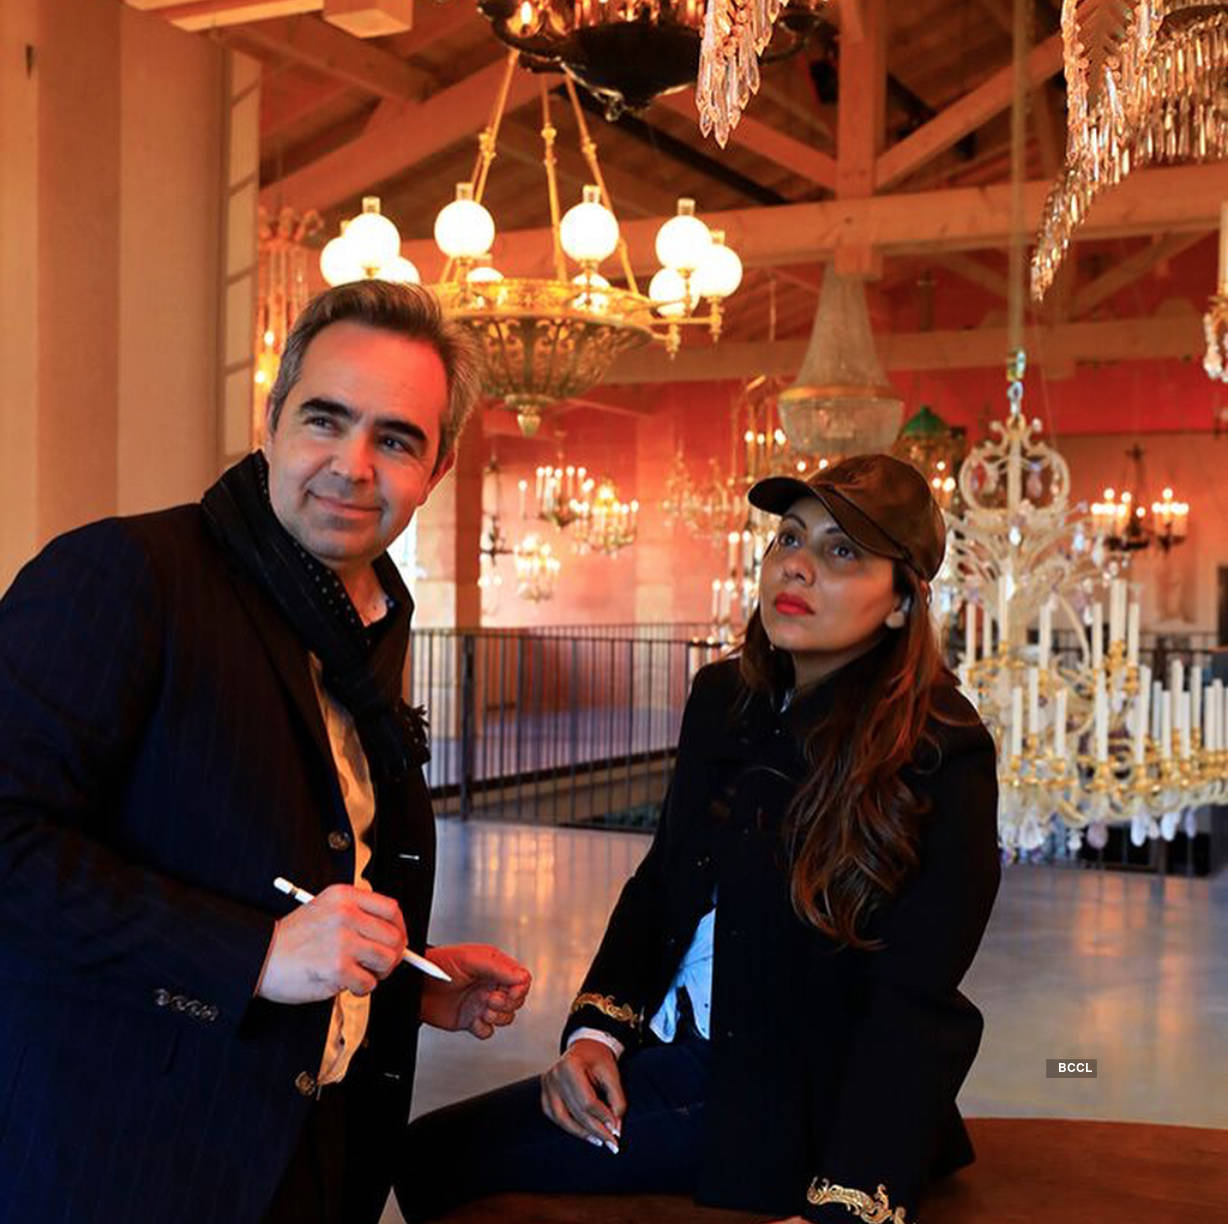 Gauri Khan at her creative best while designing a chandelier for the iconic Mathieu Lustrerie in Paris